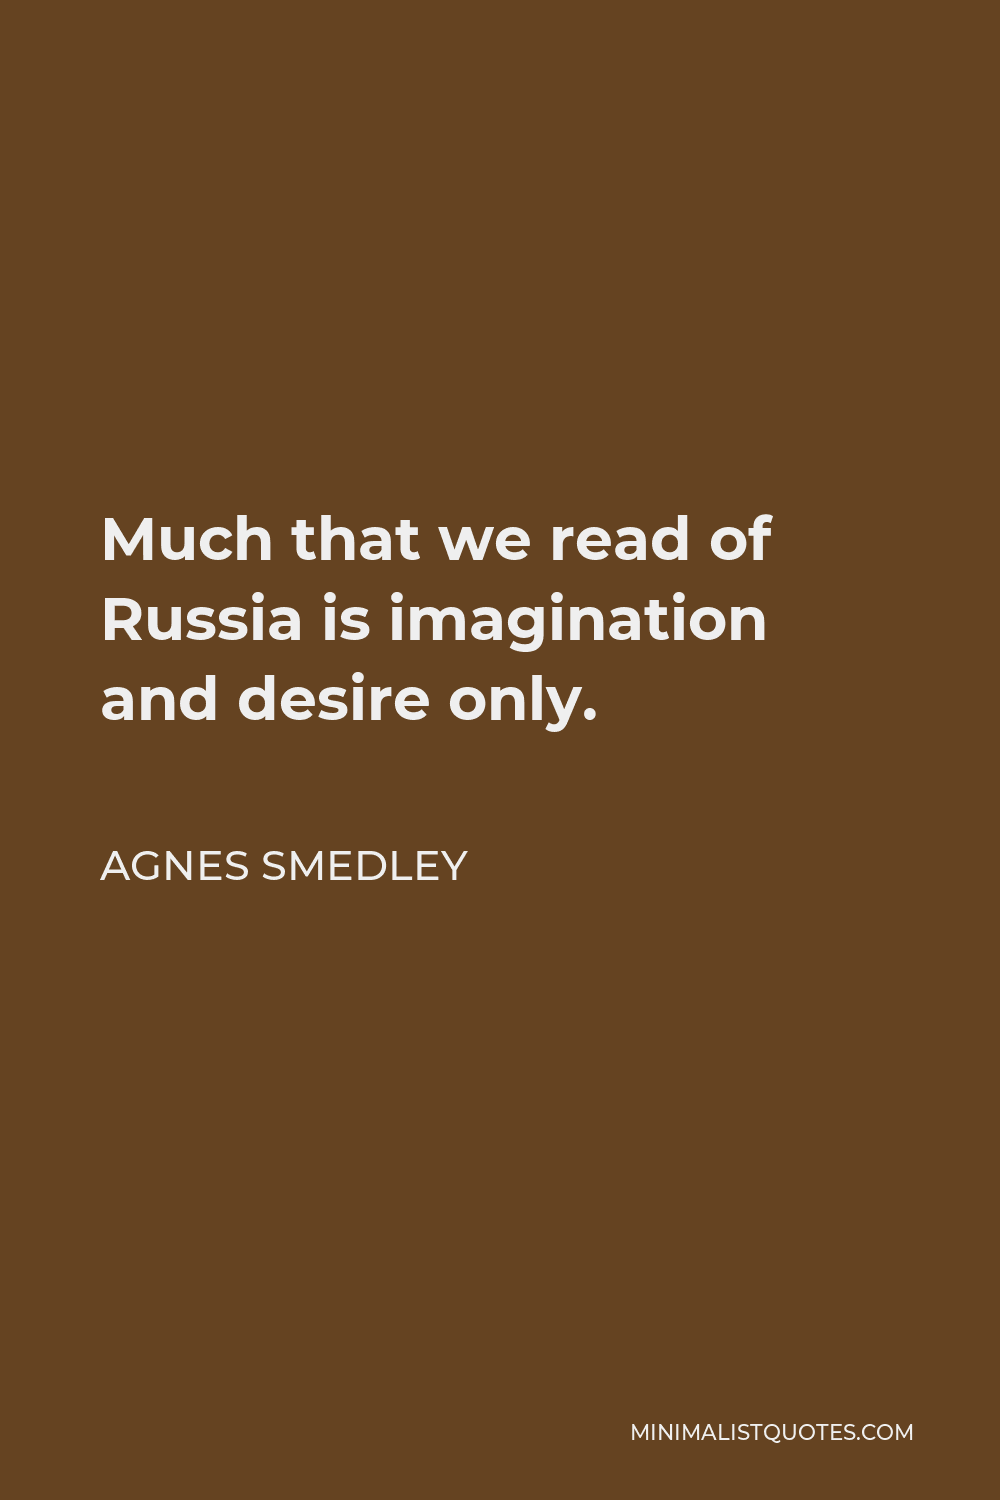 Agnes Smedley Quote - Much that we read of Russia is imagination and desire only.